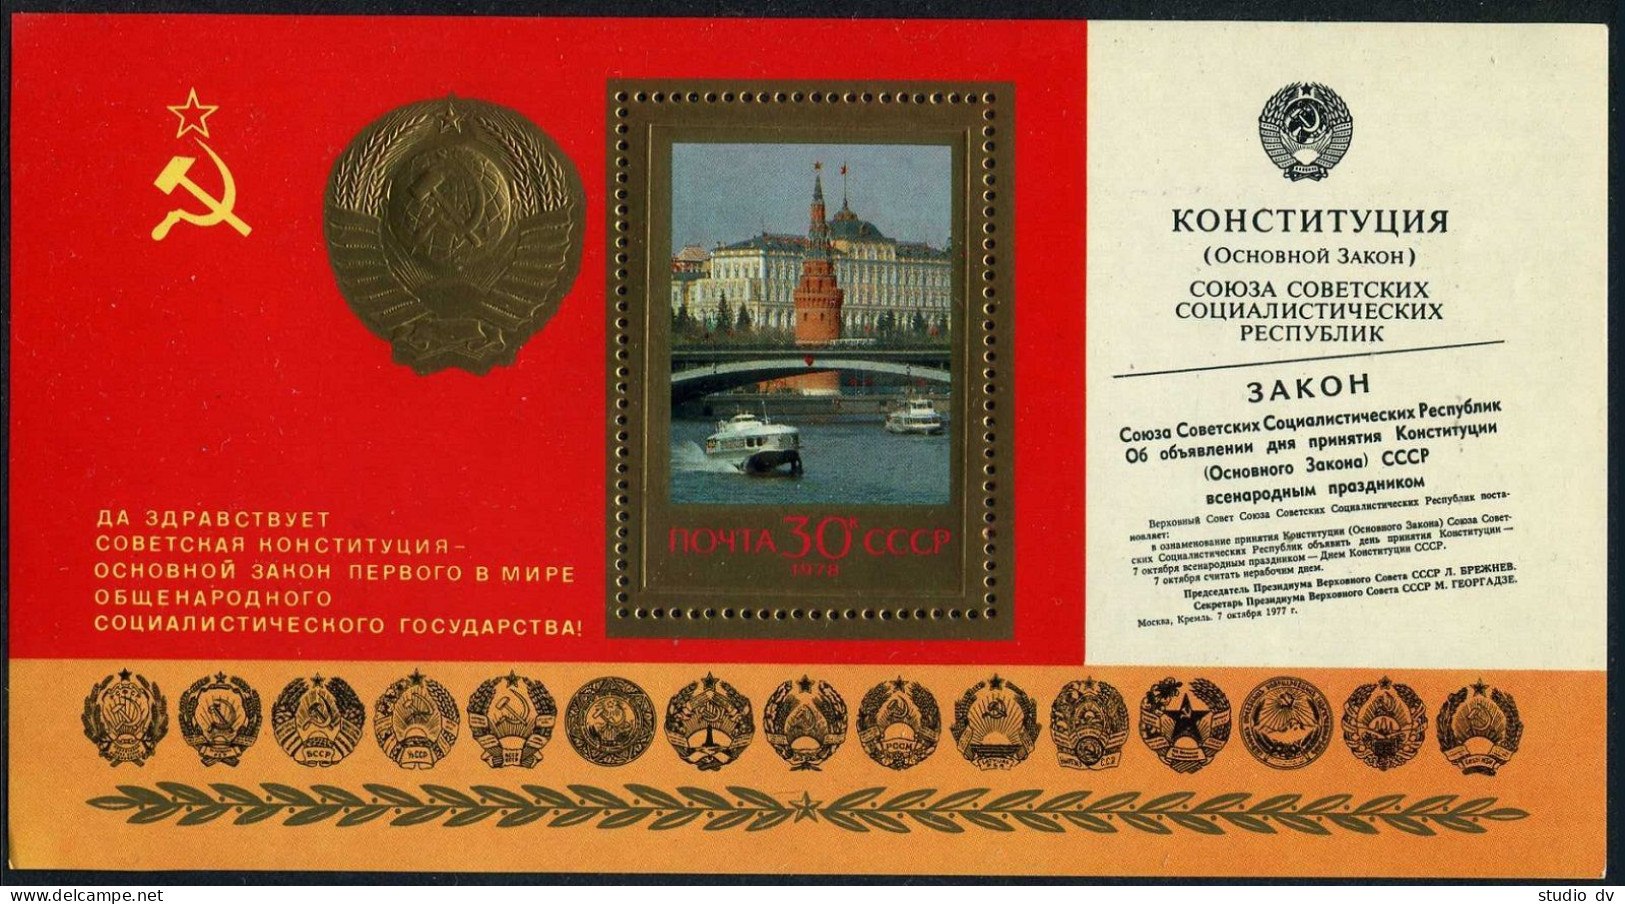 Russia 4705, MNH. Michel 4778 Bl.132. New Constitution, 1st Ann. 1978. Kremlin. - Unused Stamps